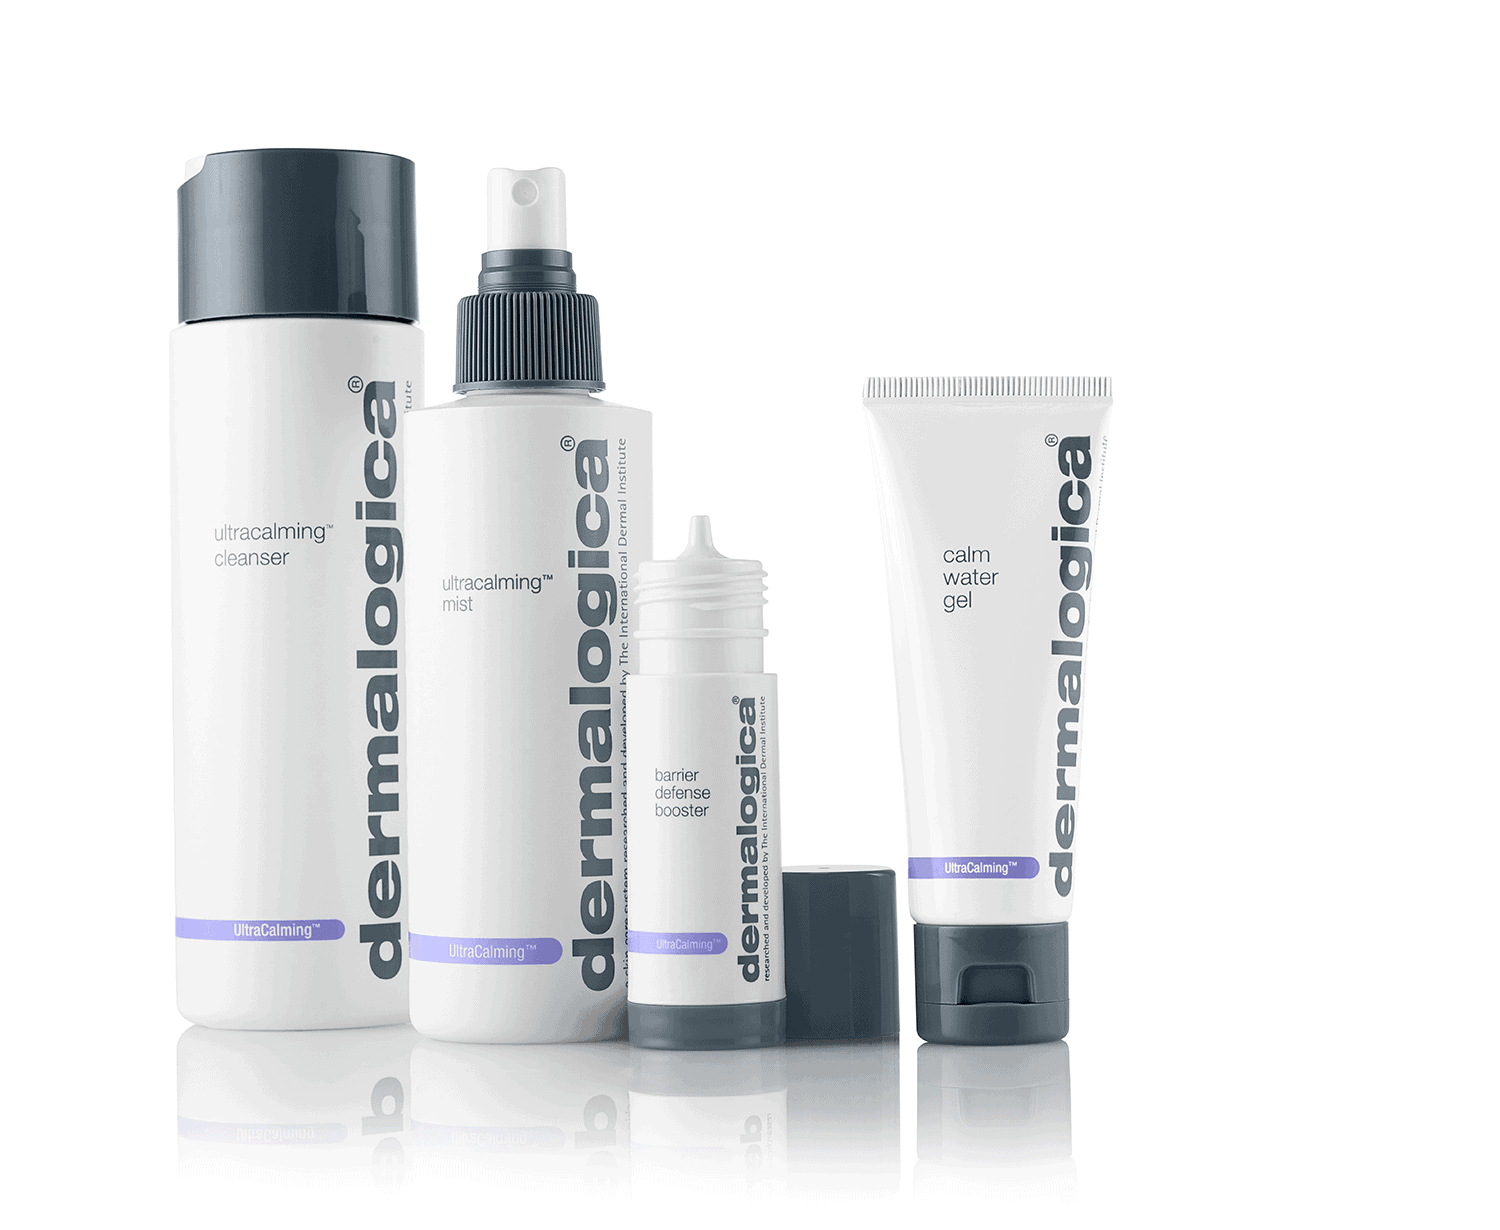 Dermalogica skin care products on a white background.